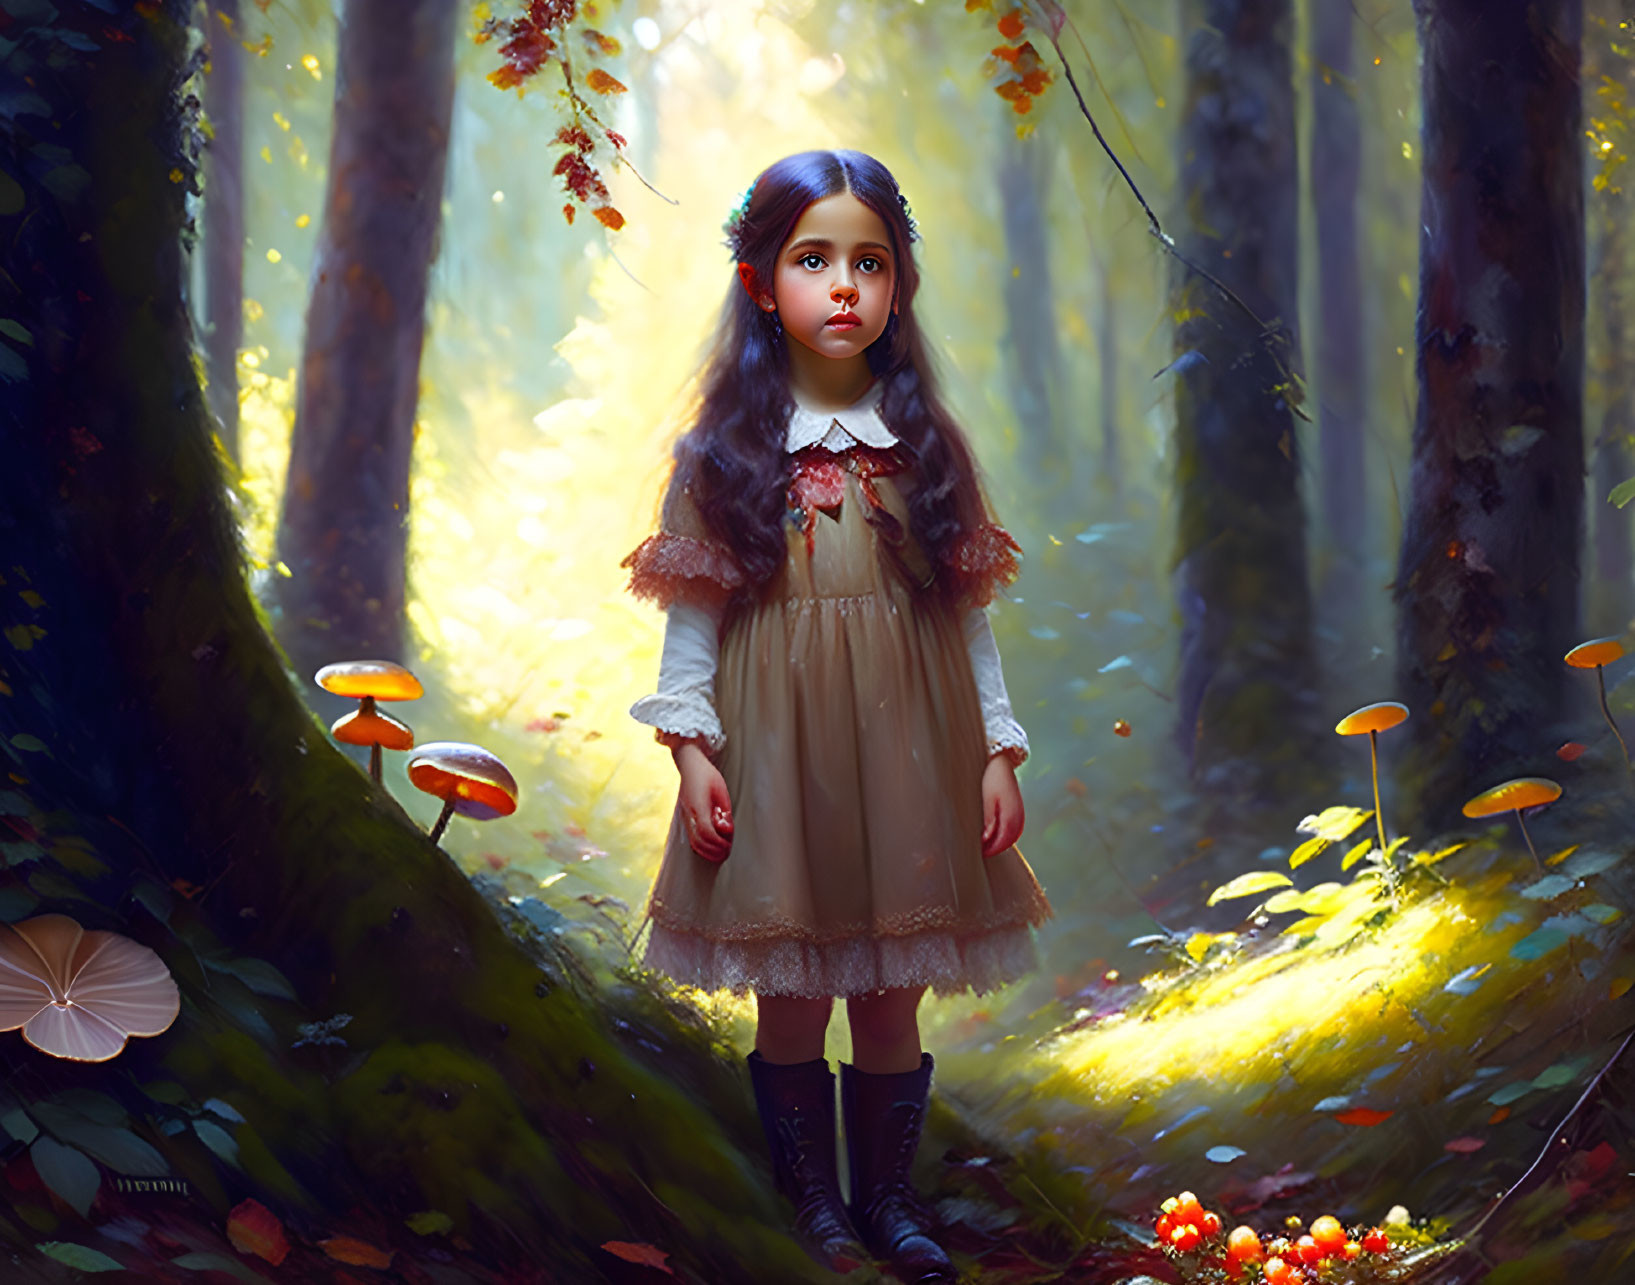 Young girl in vintage dress in enchanted forest with sunlight and mushrooms.